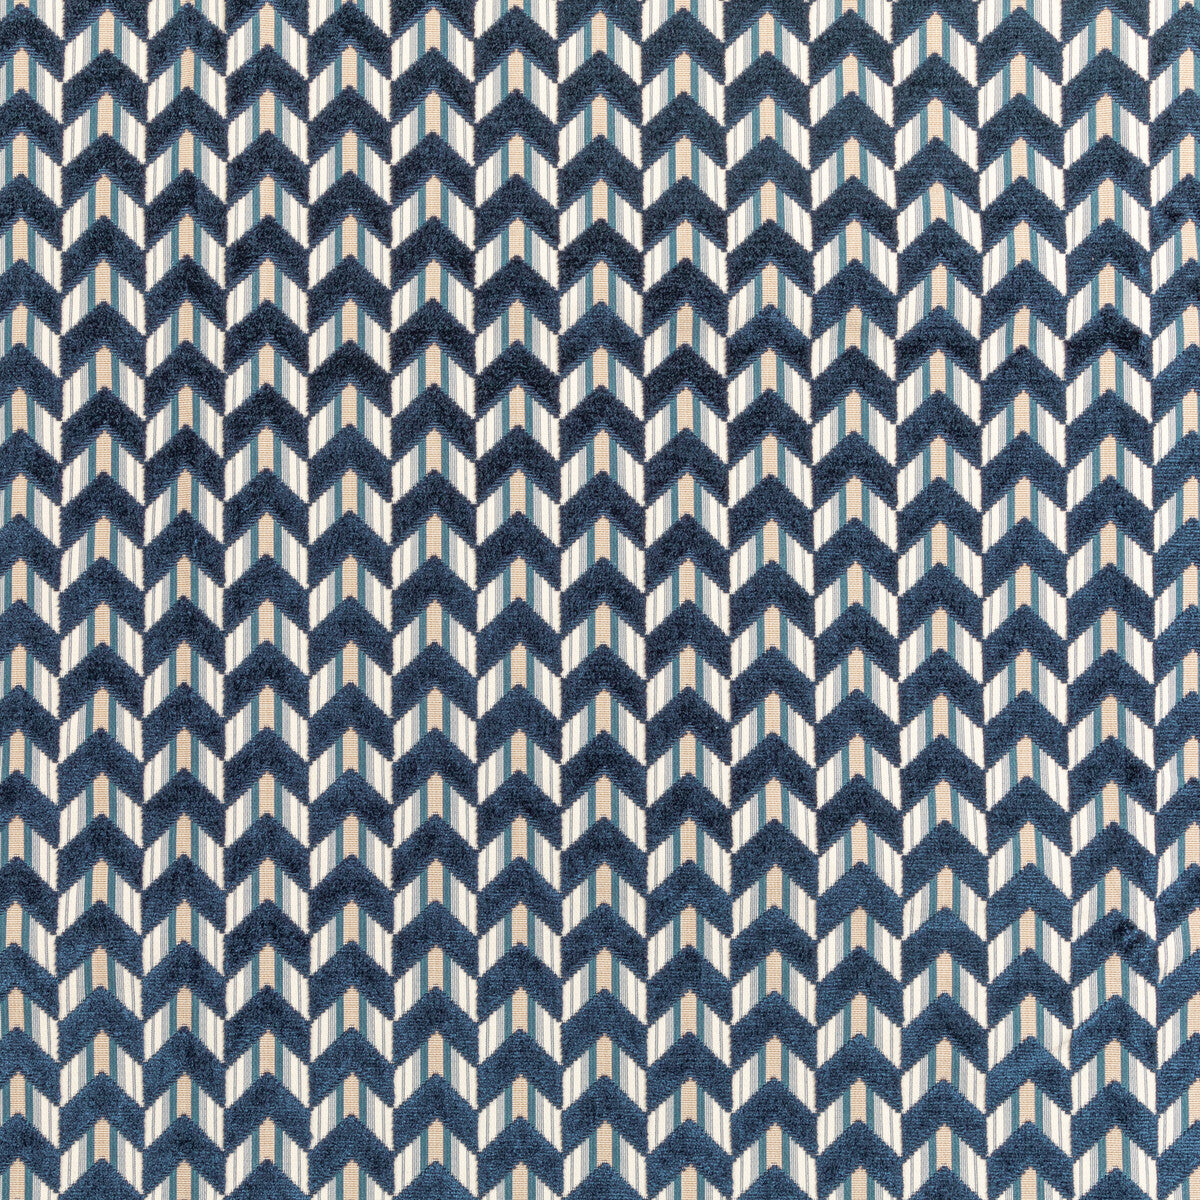 Bailey Velvet fabric in navy color - pattern 2020207.50.0 - by Lee Jofa in the Breckenridge collection